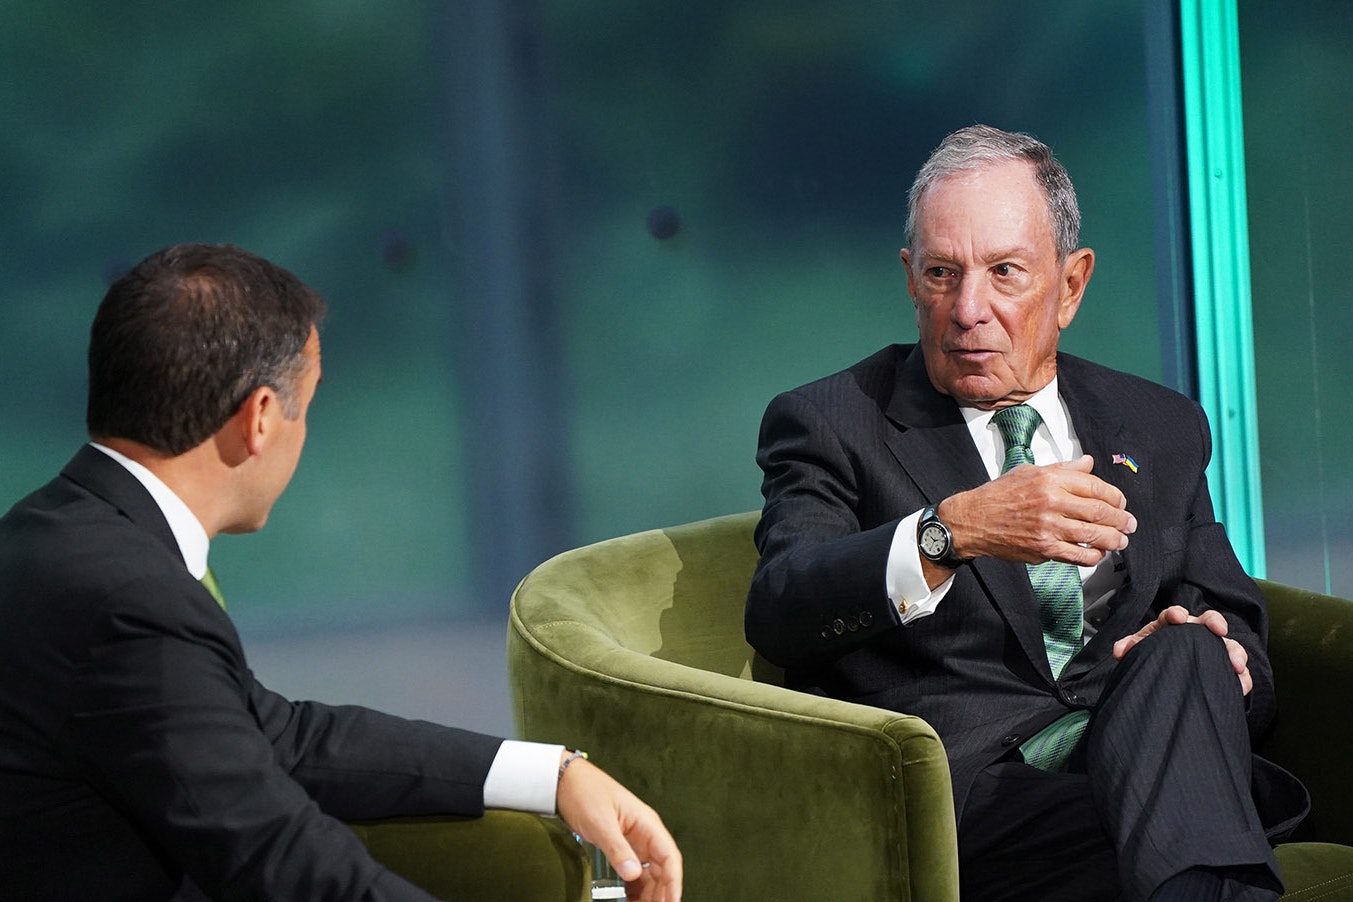 Billionaire Michael Bloomberg, right, speaks at Thursday's New York Times Climate Summit. He's pledged another $500 million to bring an end to coal- and gas-fired power generation in the United States.